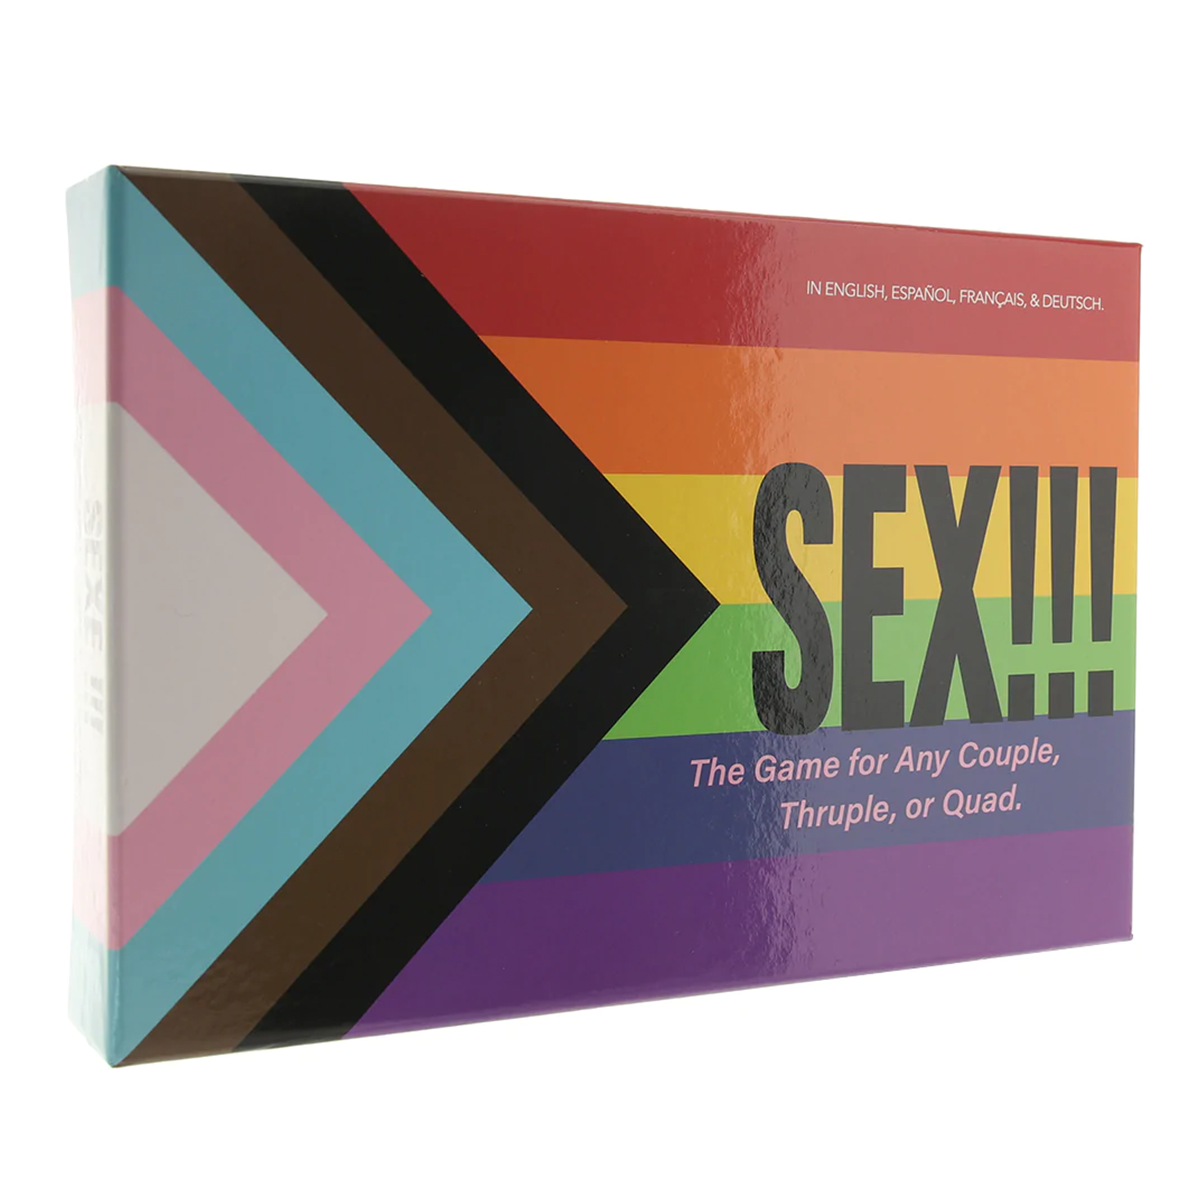 SEX!!! The Game for Any Couple, Throuple, or Quad